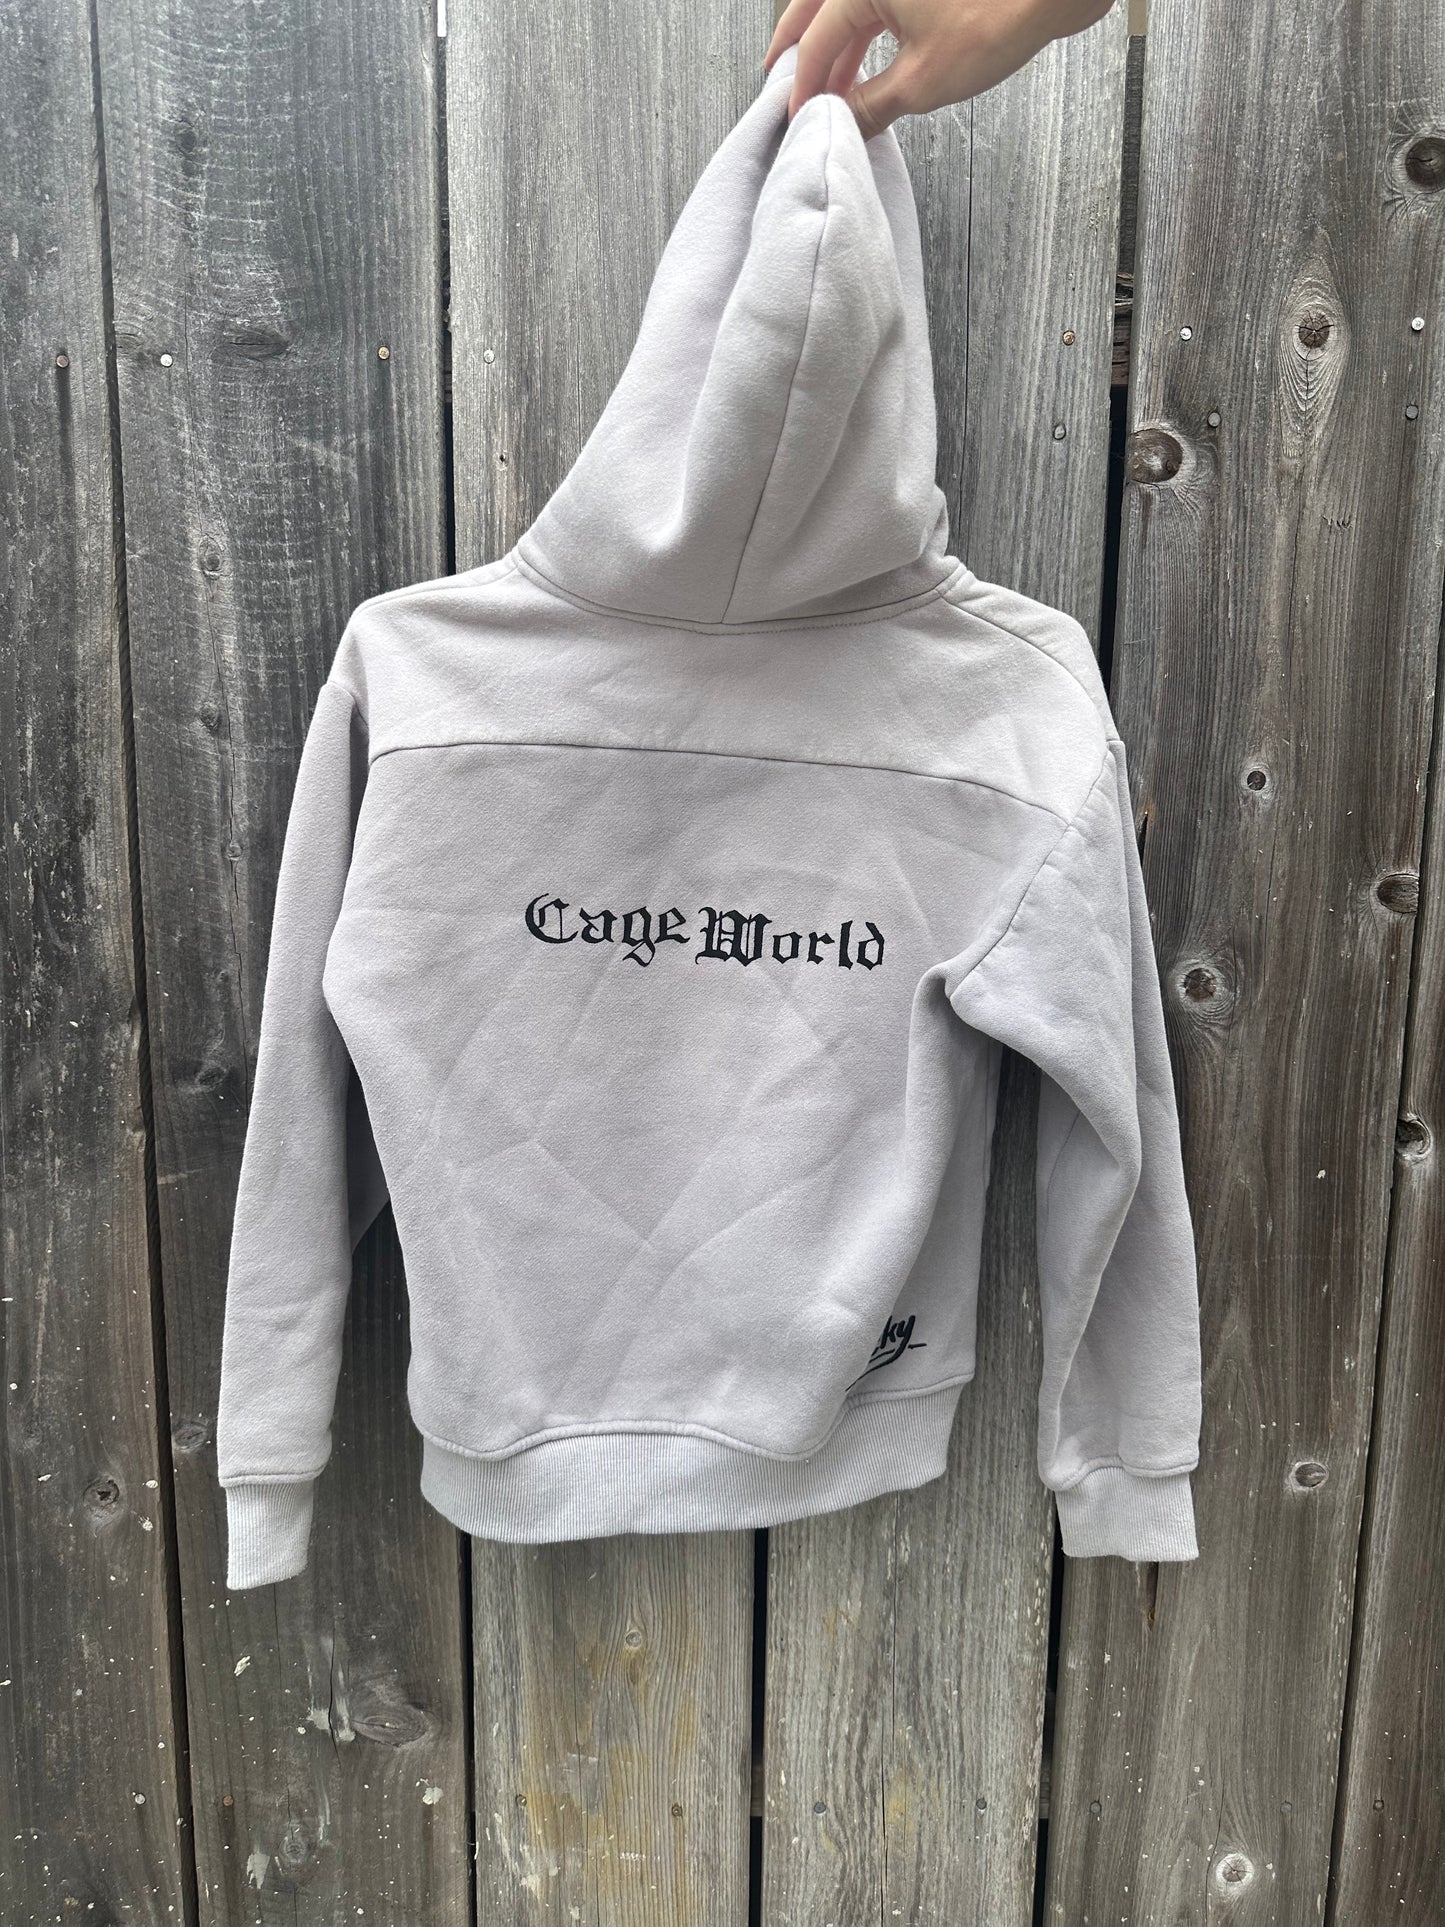 cage world :D hoodie